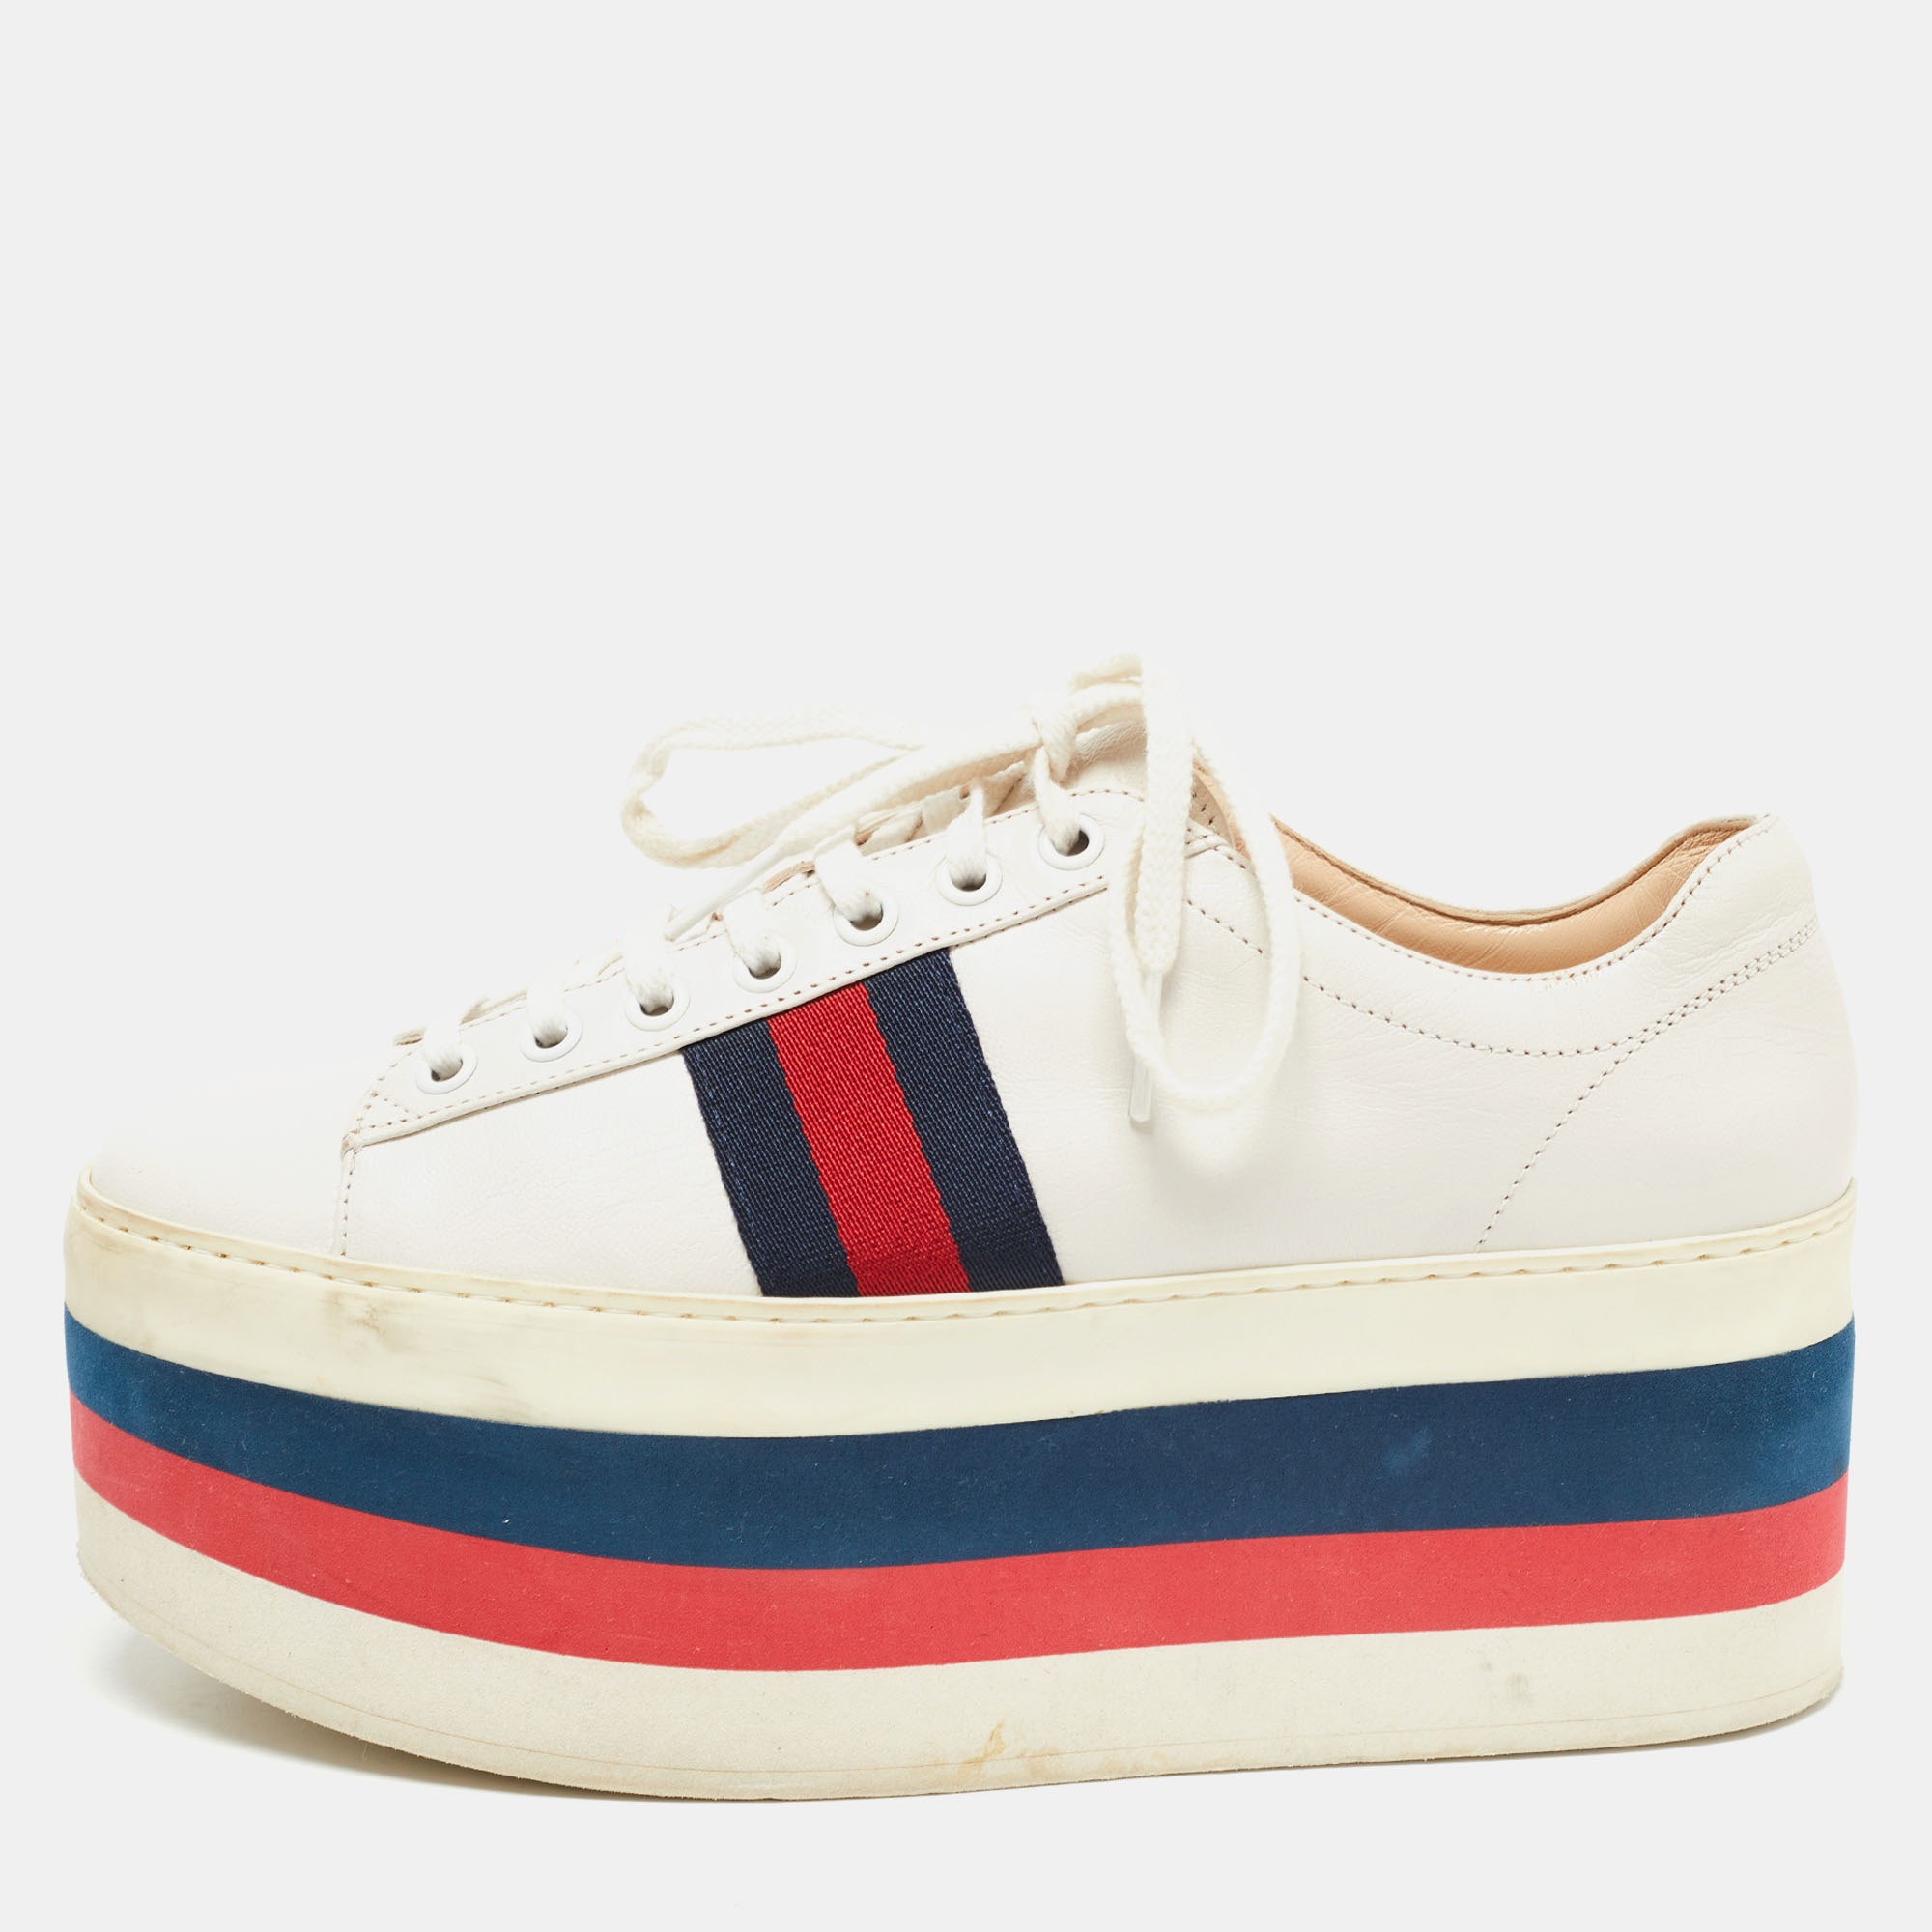 Pre-owned Gucci White Leather Peggy Platform Sneakers Size 38.5